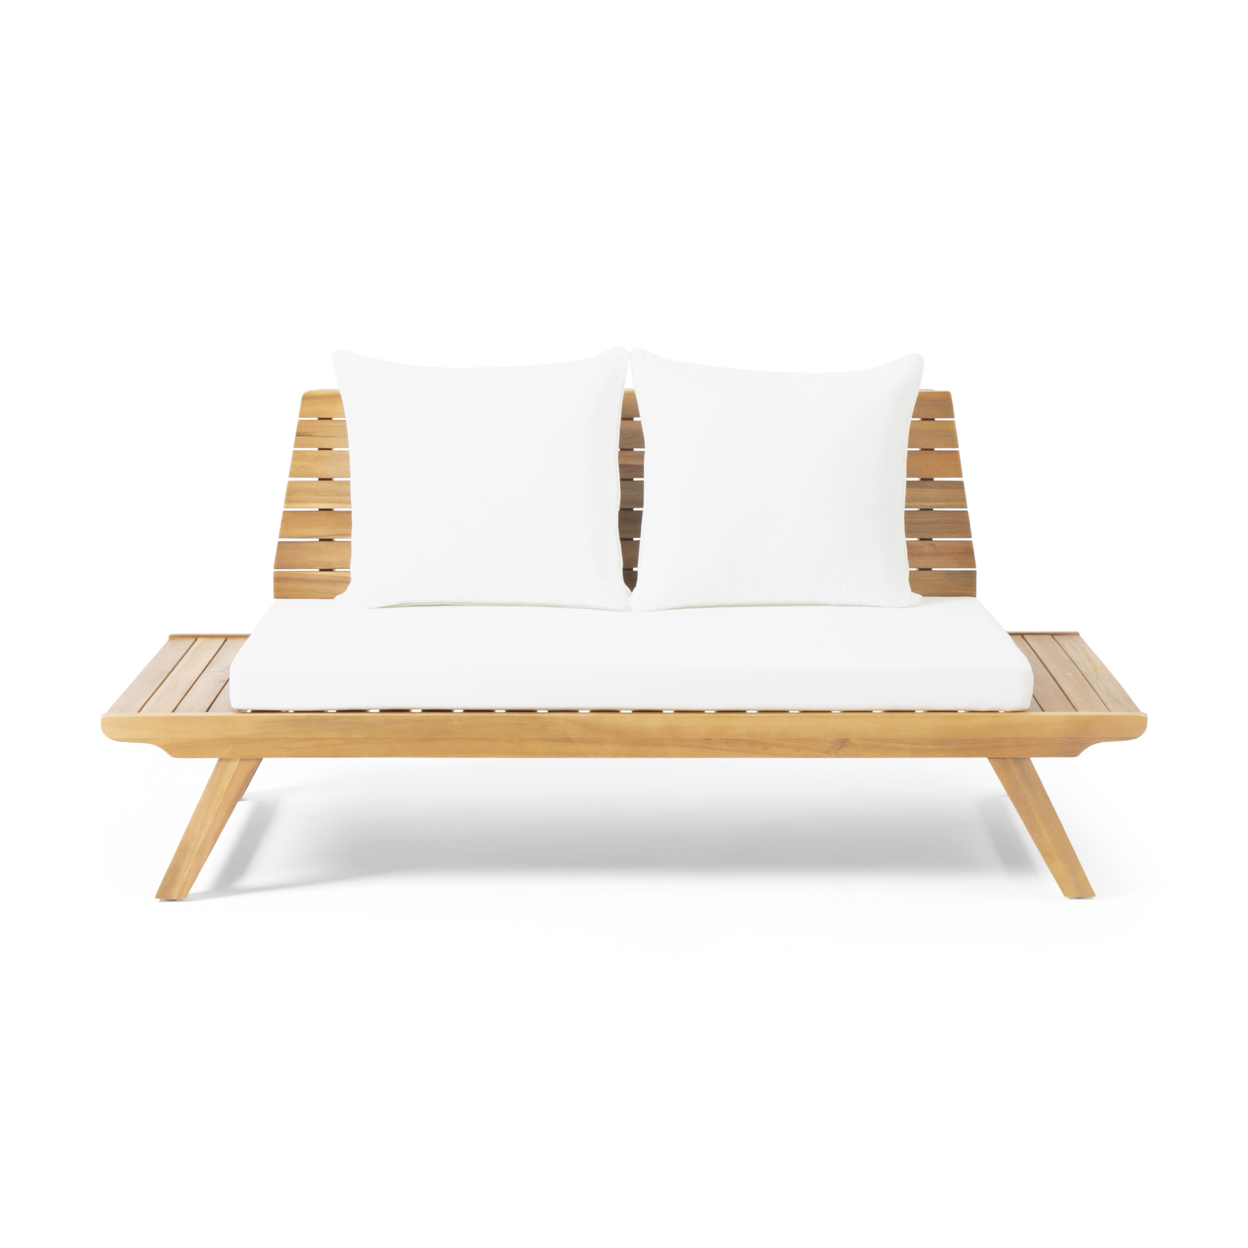 Kailee Outdoor Wooden Loveseat With Cushions - Teak Finish + White